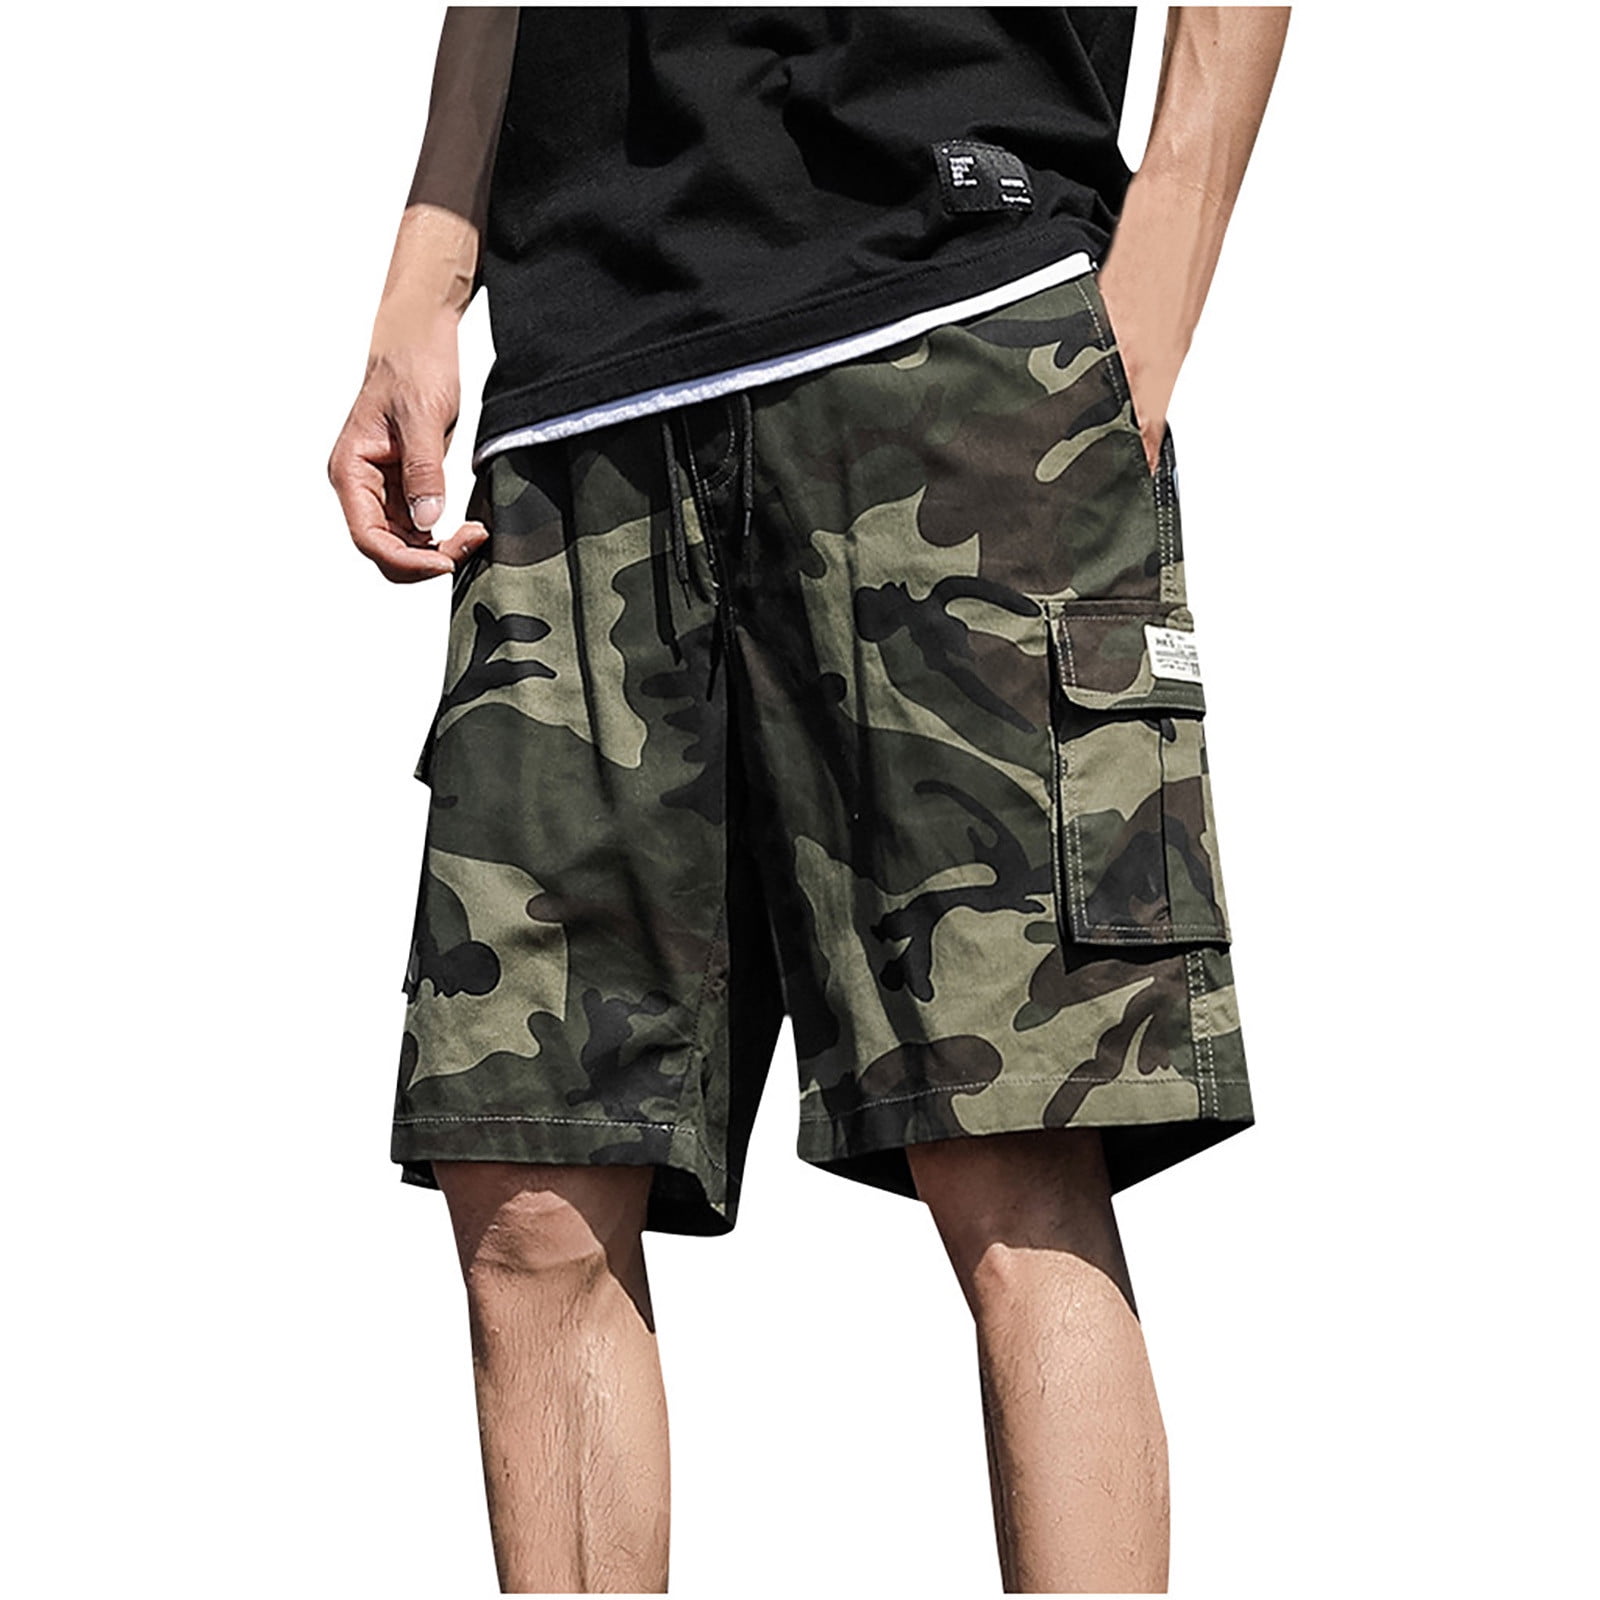  YKJATS Cargo Shorts for Men Mens Shorts Elastic Waist Relaxed  Fit Cotton Lightweight Hiking Fishing Summer Work Pants Work Shorts for Men  Flexible Drawstring Joggers (Small, Black) : Sports & Outdoors